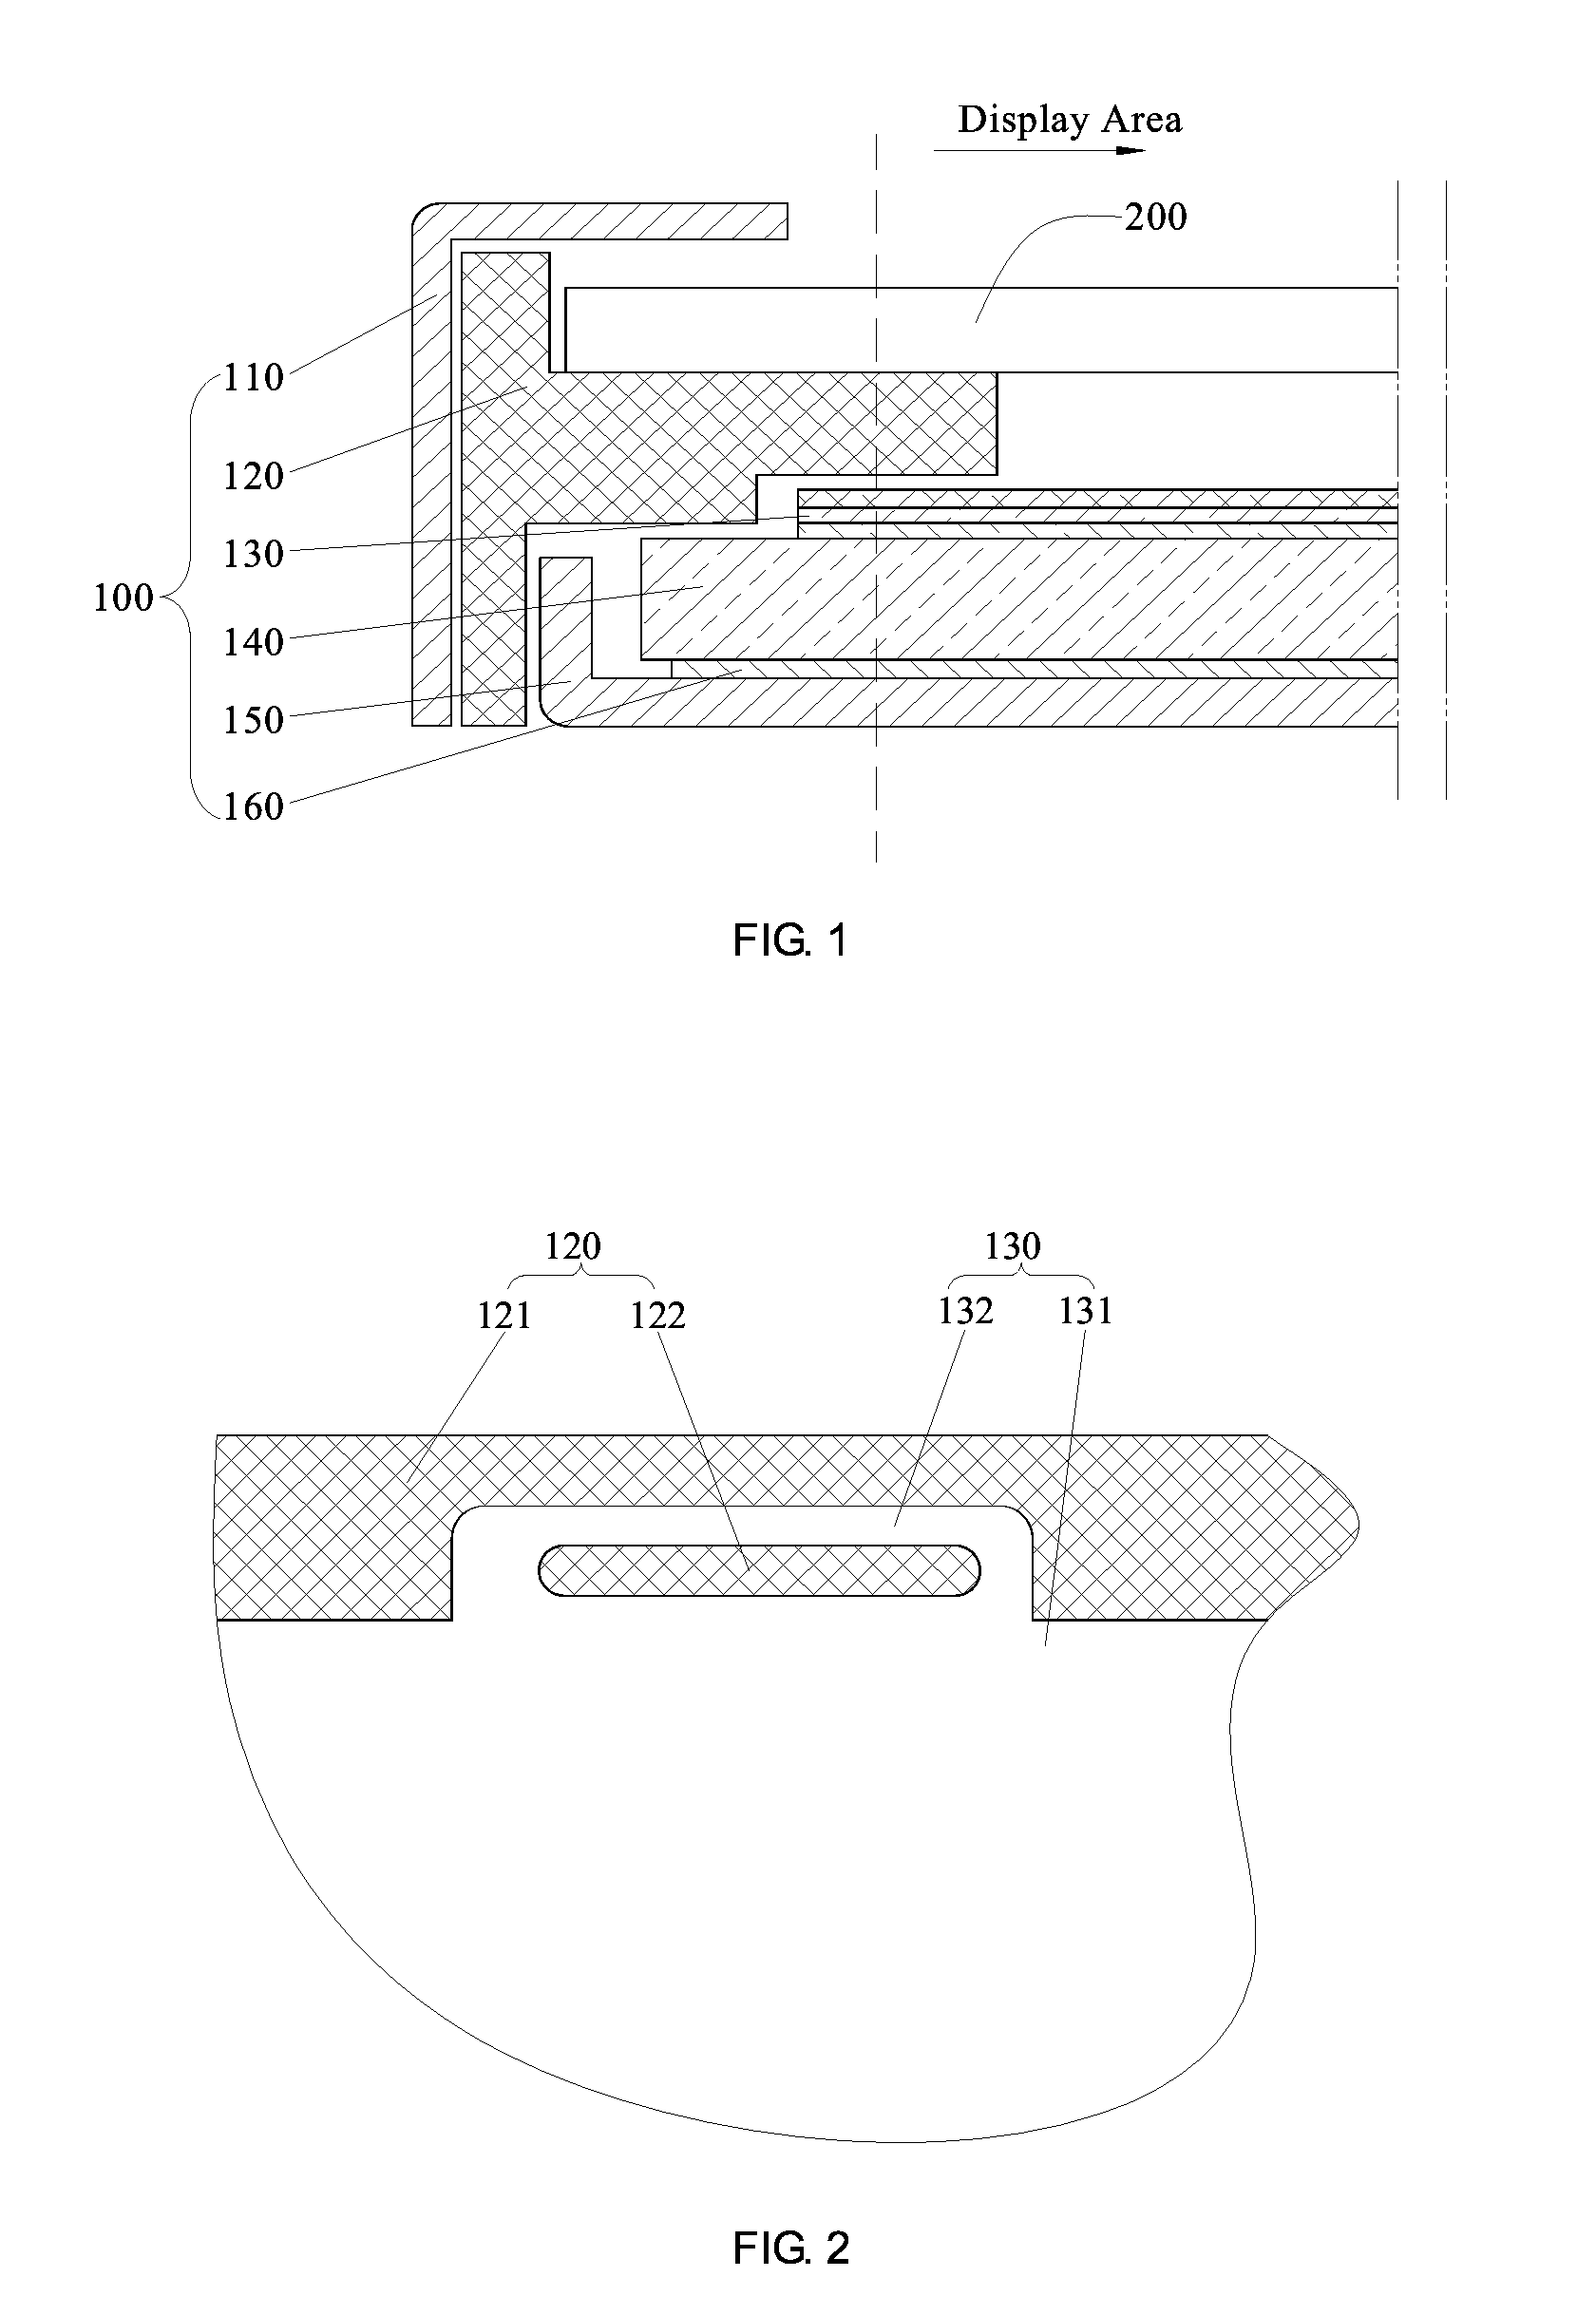 Backlight and Display Device